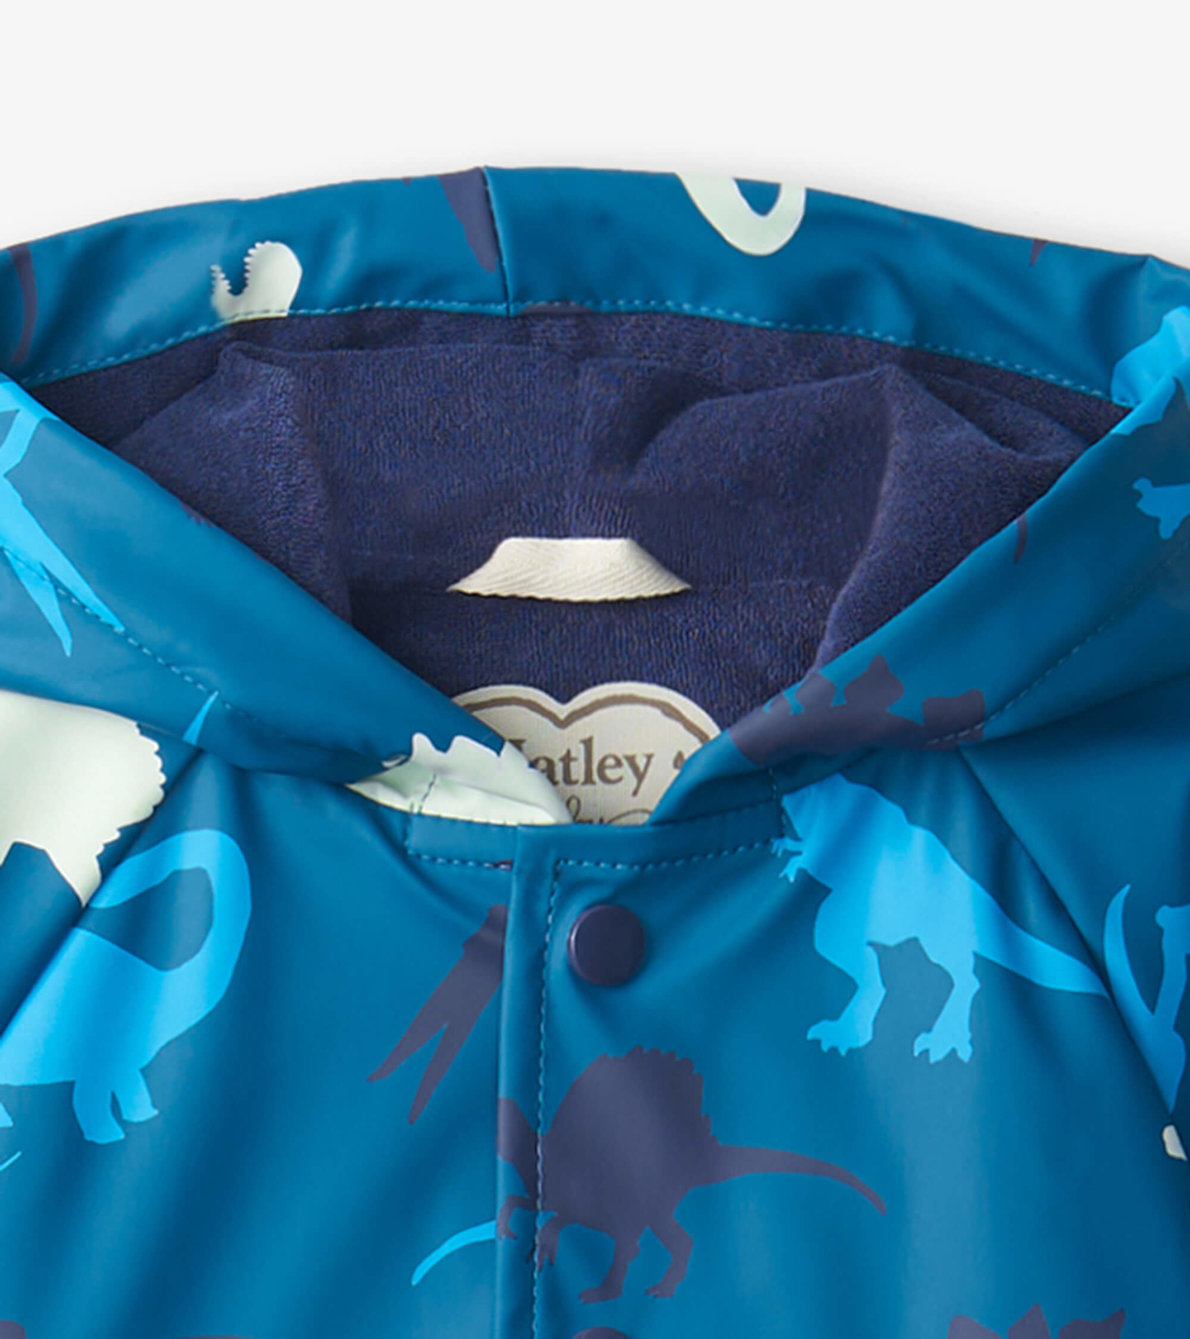 View larger image of Real Dinosaurs Colour Changing Baby Raincoat